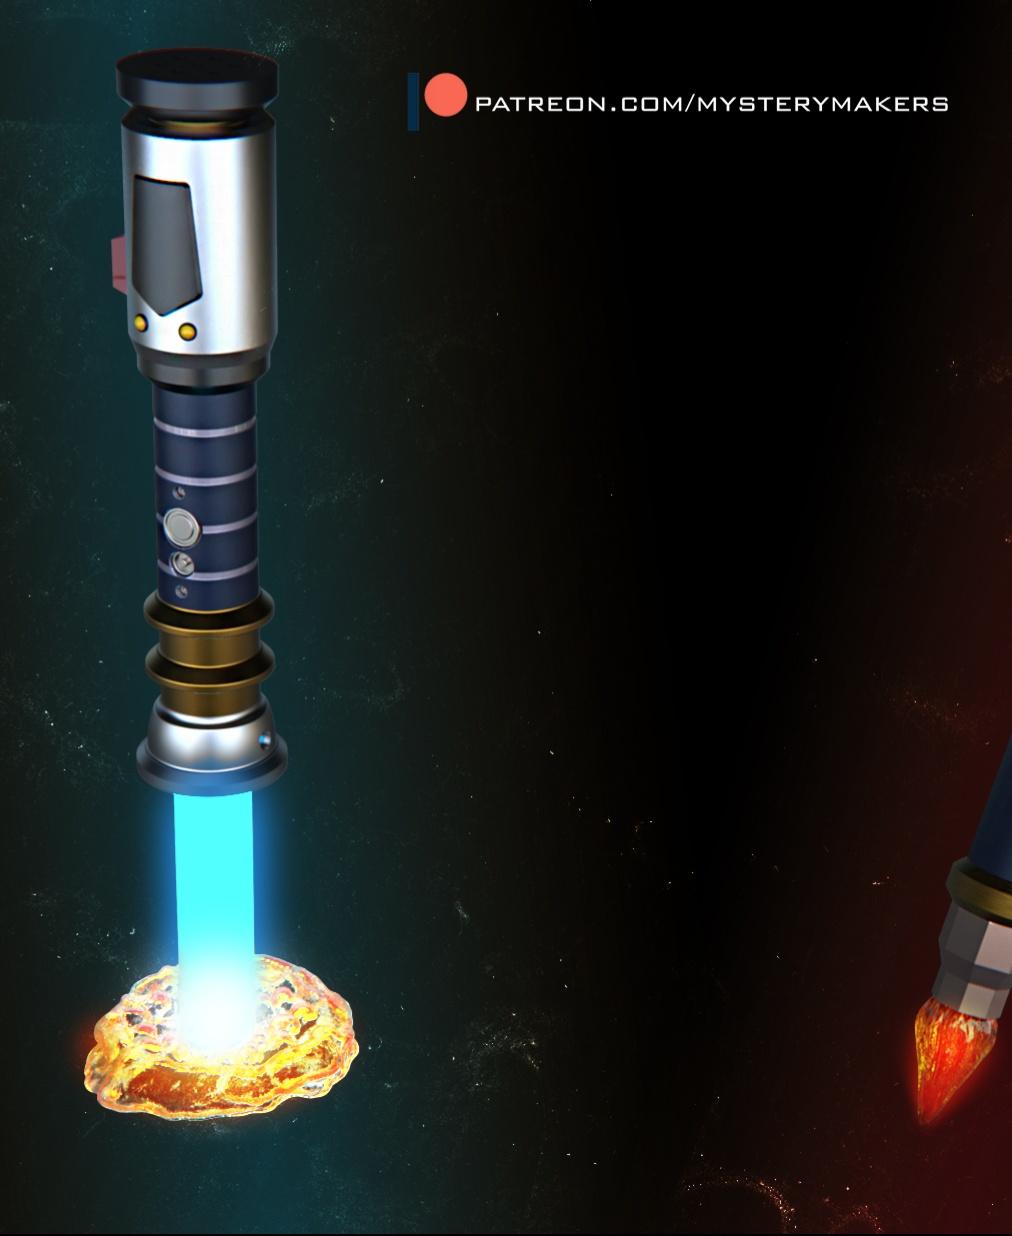 Rick and Morty lightsabers - functional 3d model